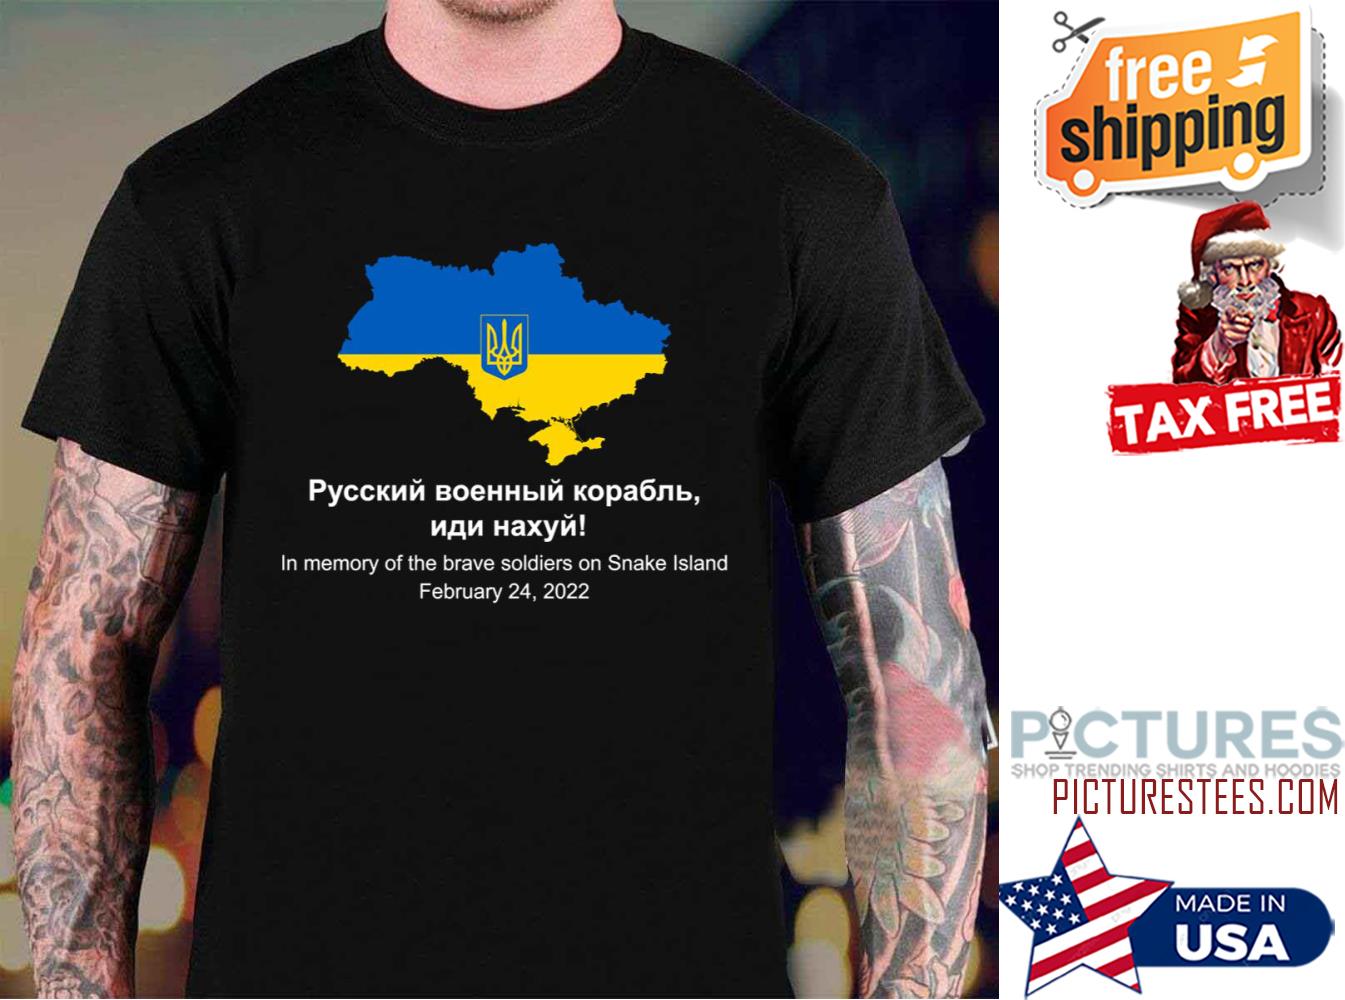 From Russia with free shipping - Rest of World